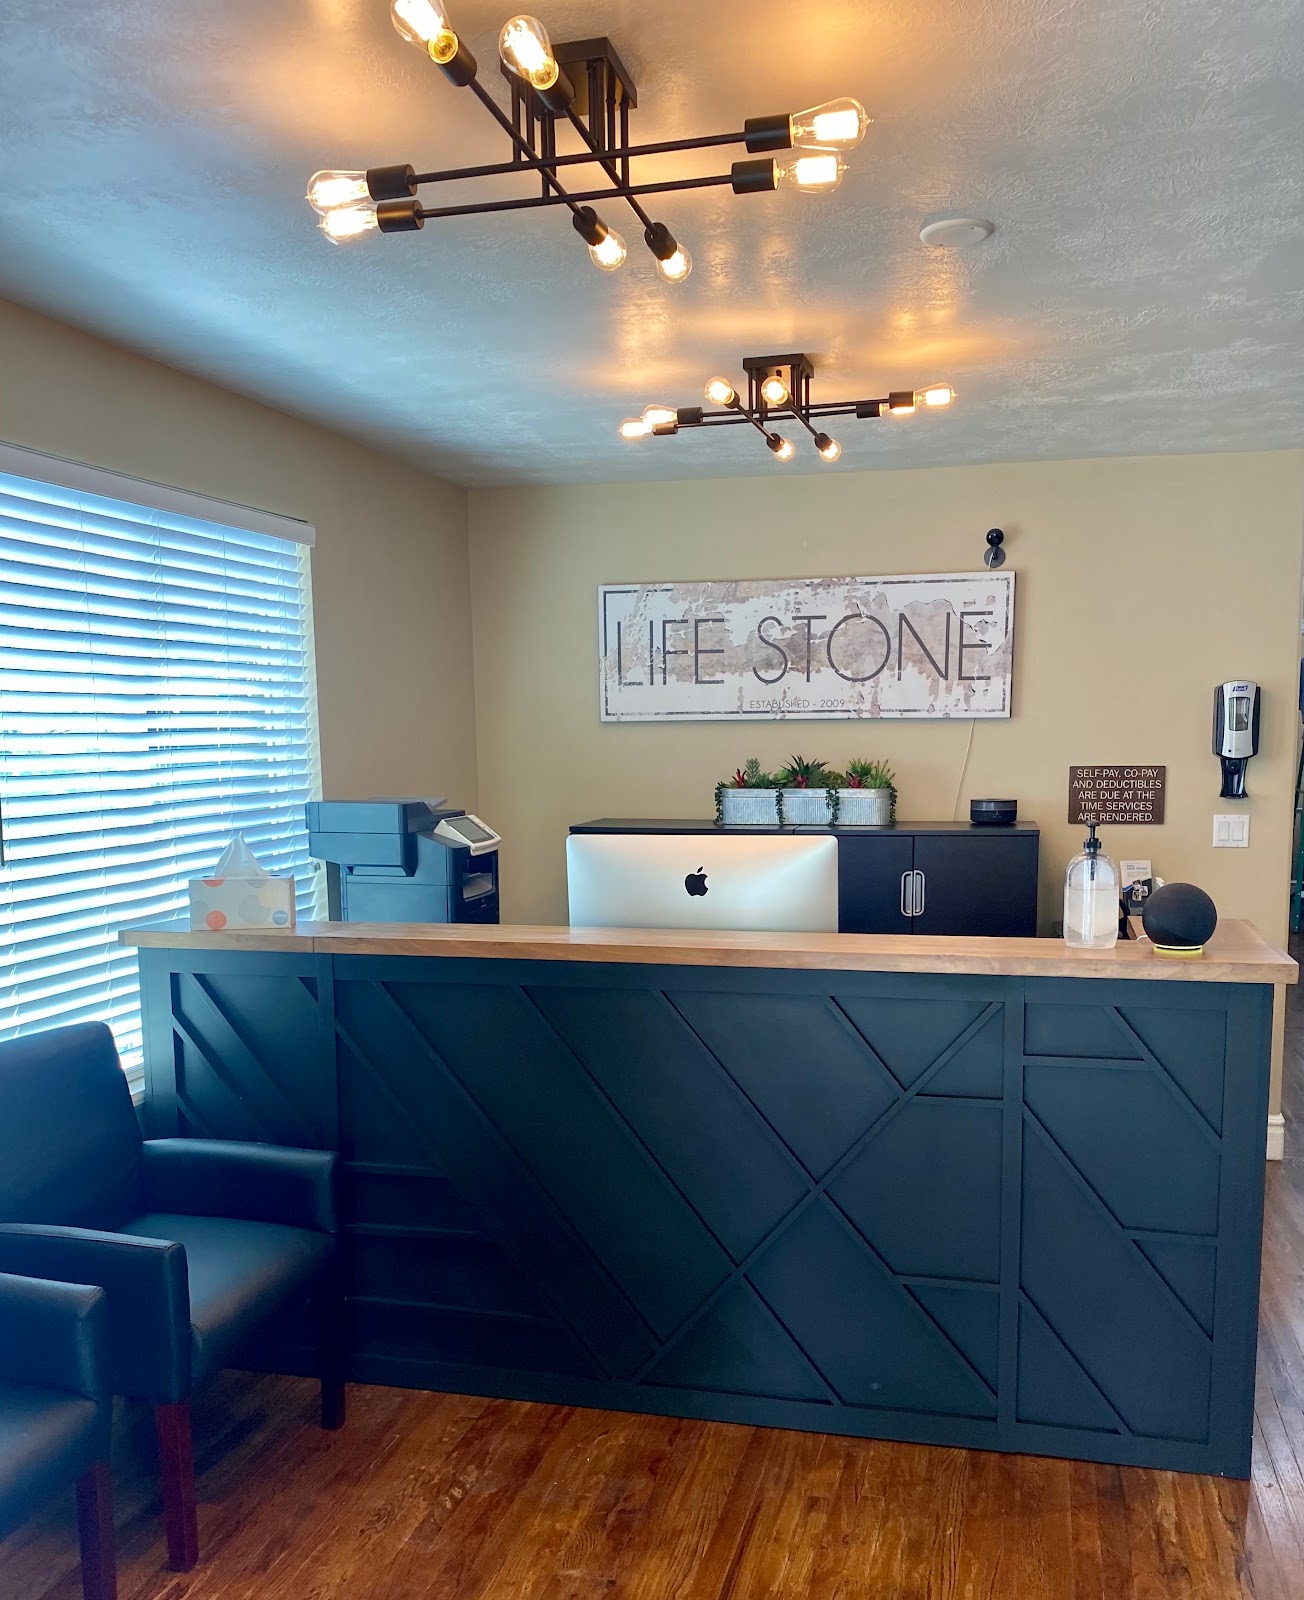 Life Stone Counseling Center